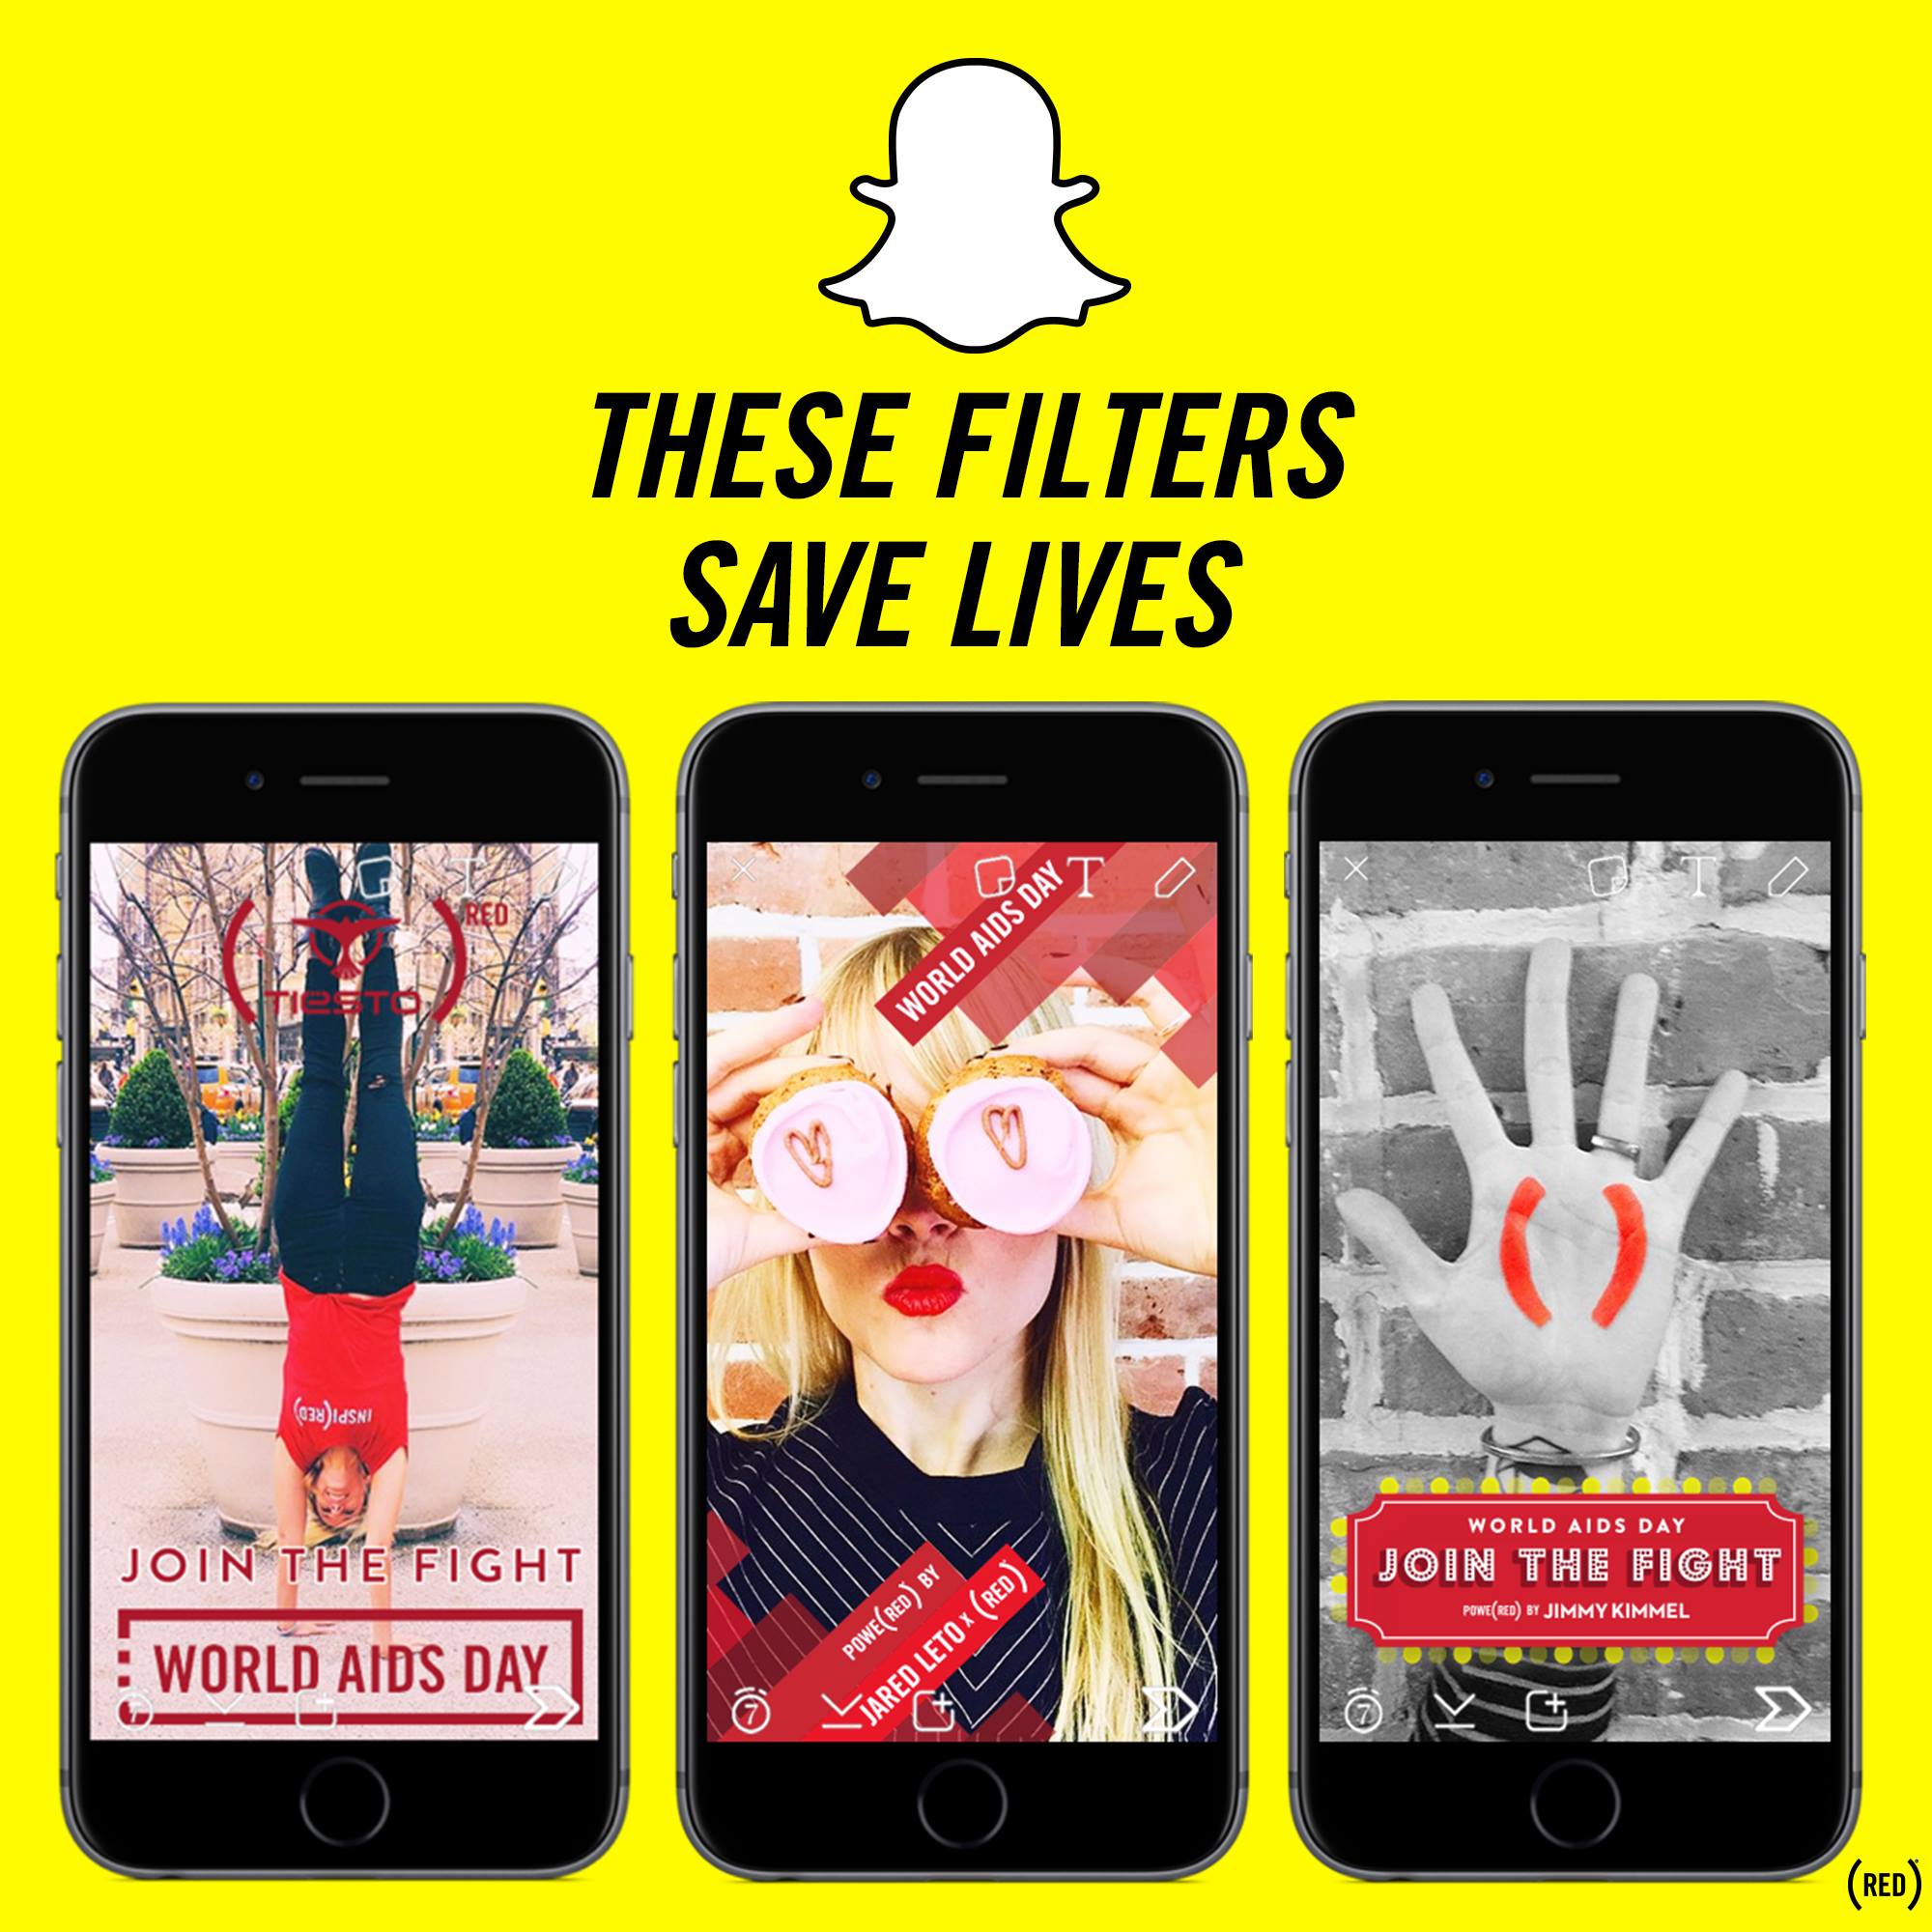 (RED) Snapchat Geofilters